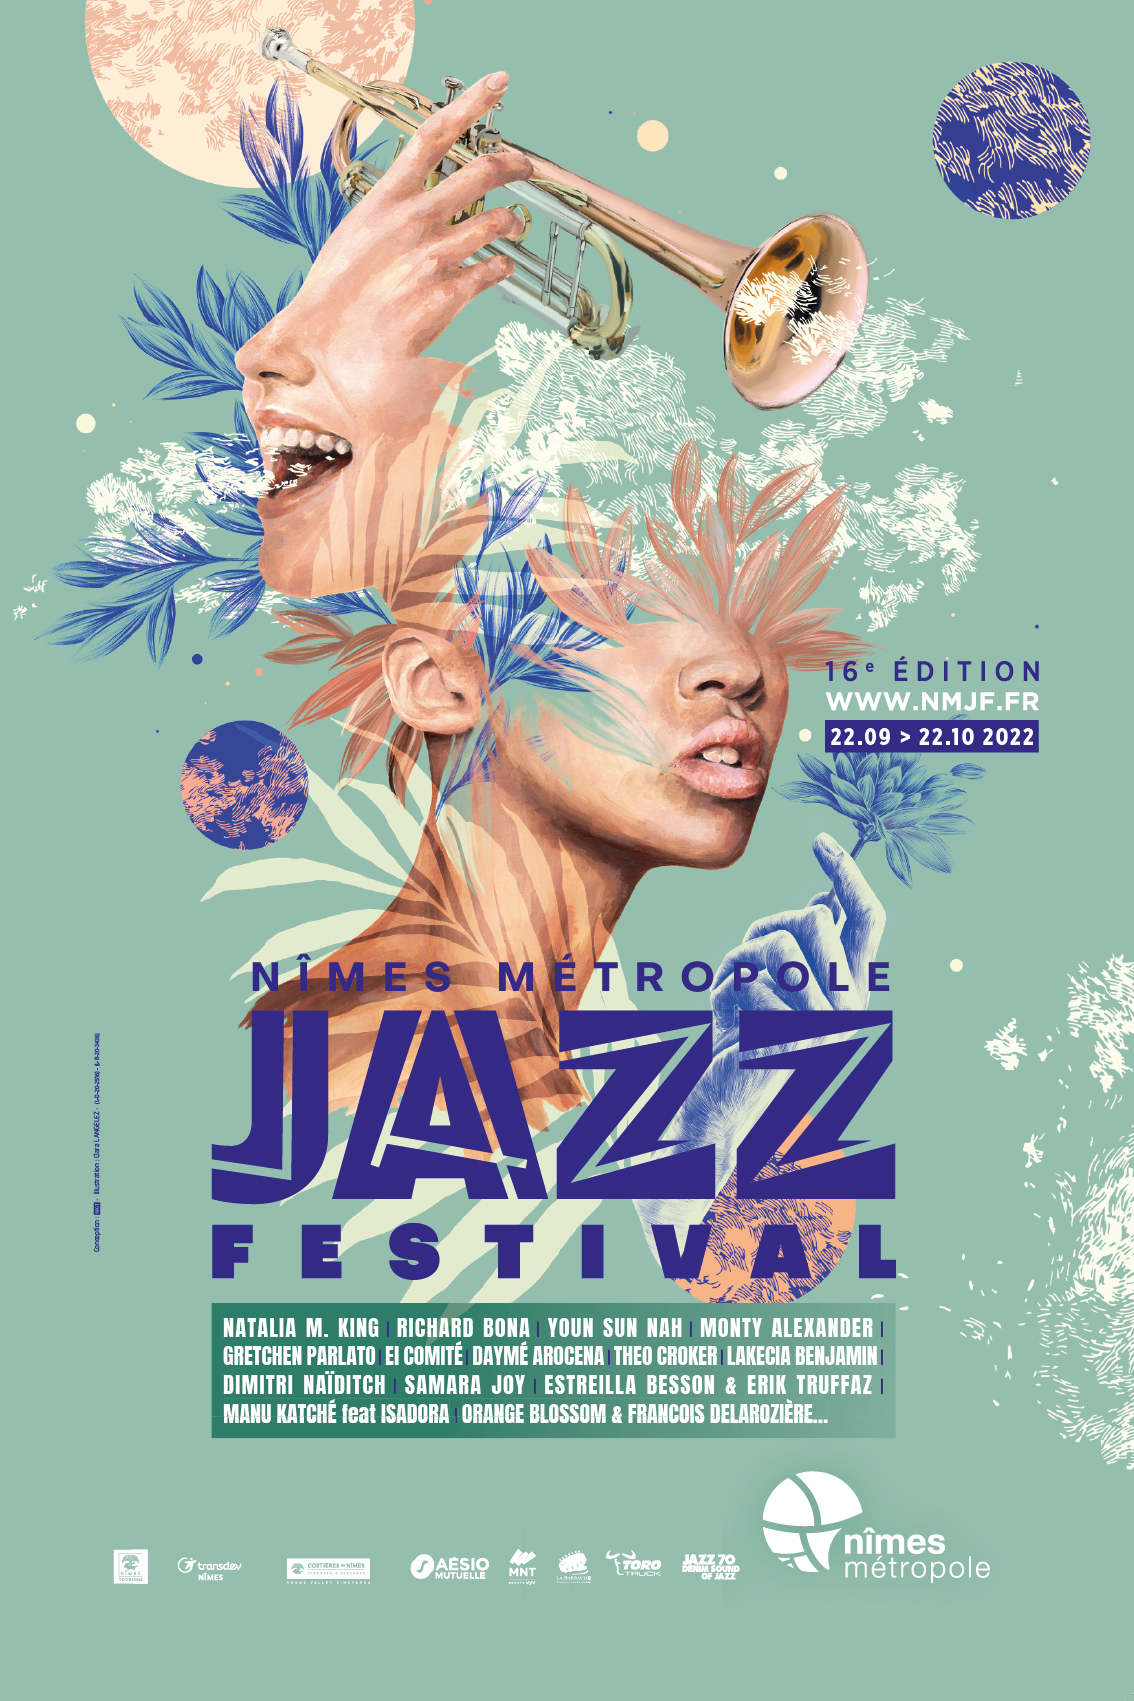 https://nmjf.fr/fileadmin/mediatheque/Culture/Images/N%C3%AEmes_M%C3%A9tropole_Jazz_Festival/2022/NMJF-2022-Affiche.jpg